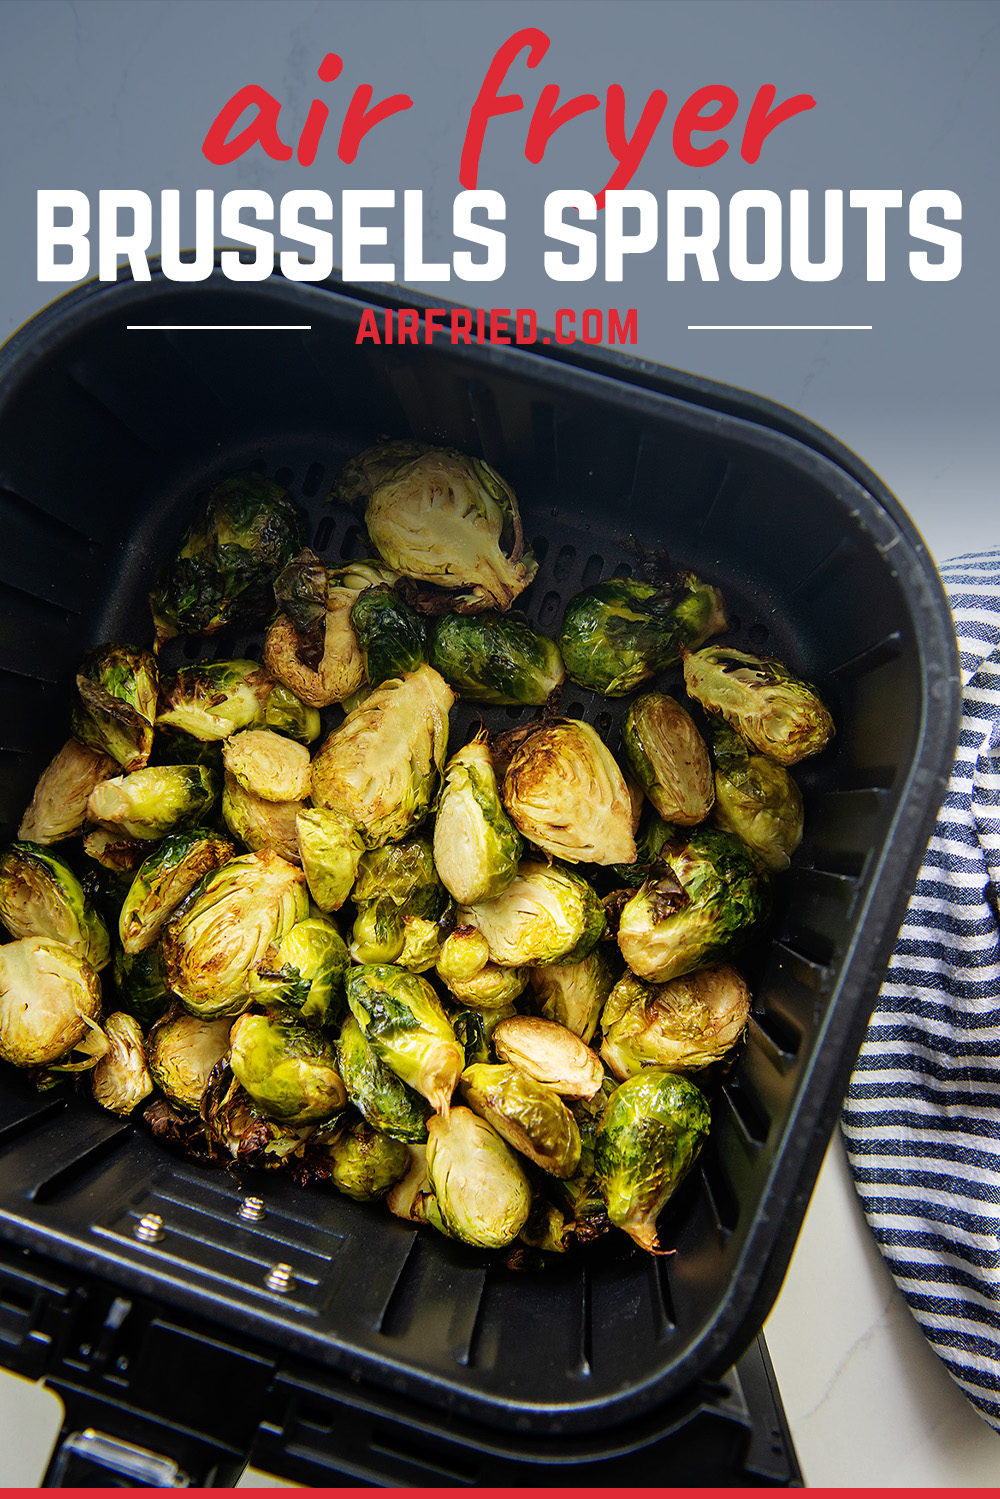 Air fried brussel sprouts are fast, crispy, and a healthy side dish!